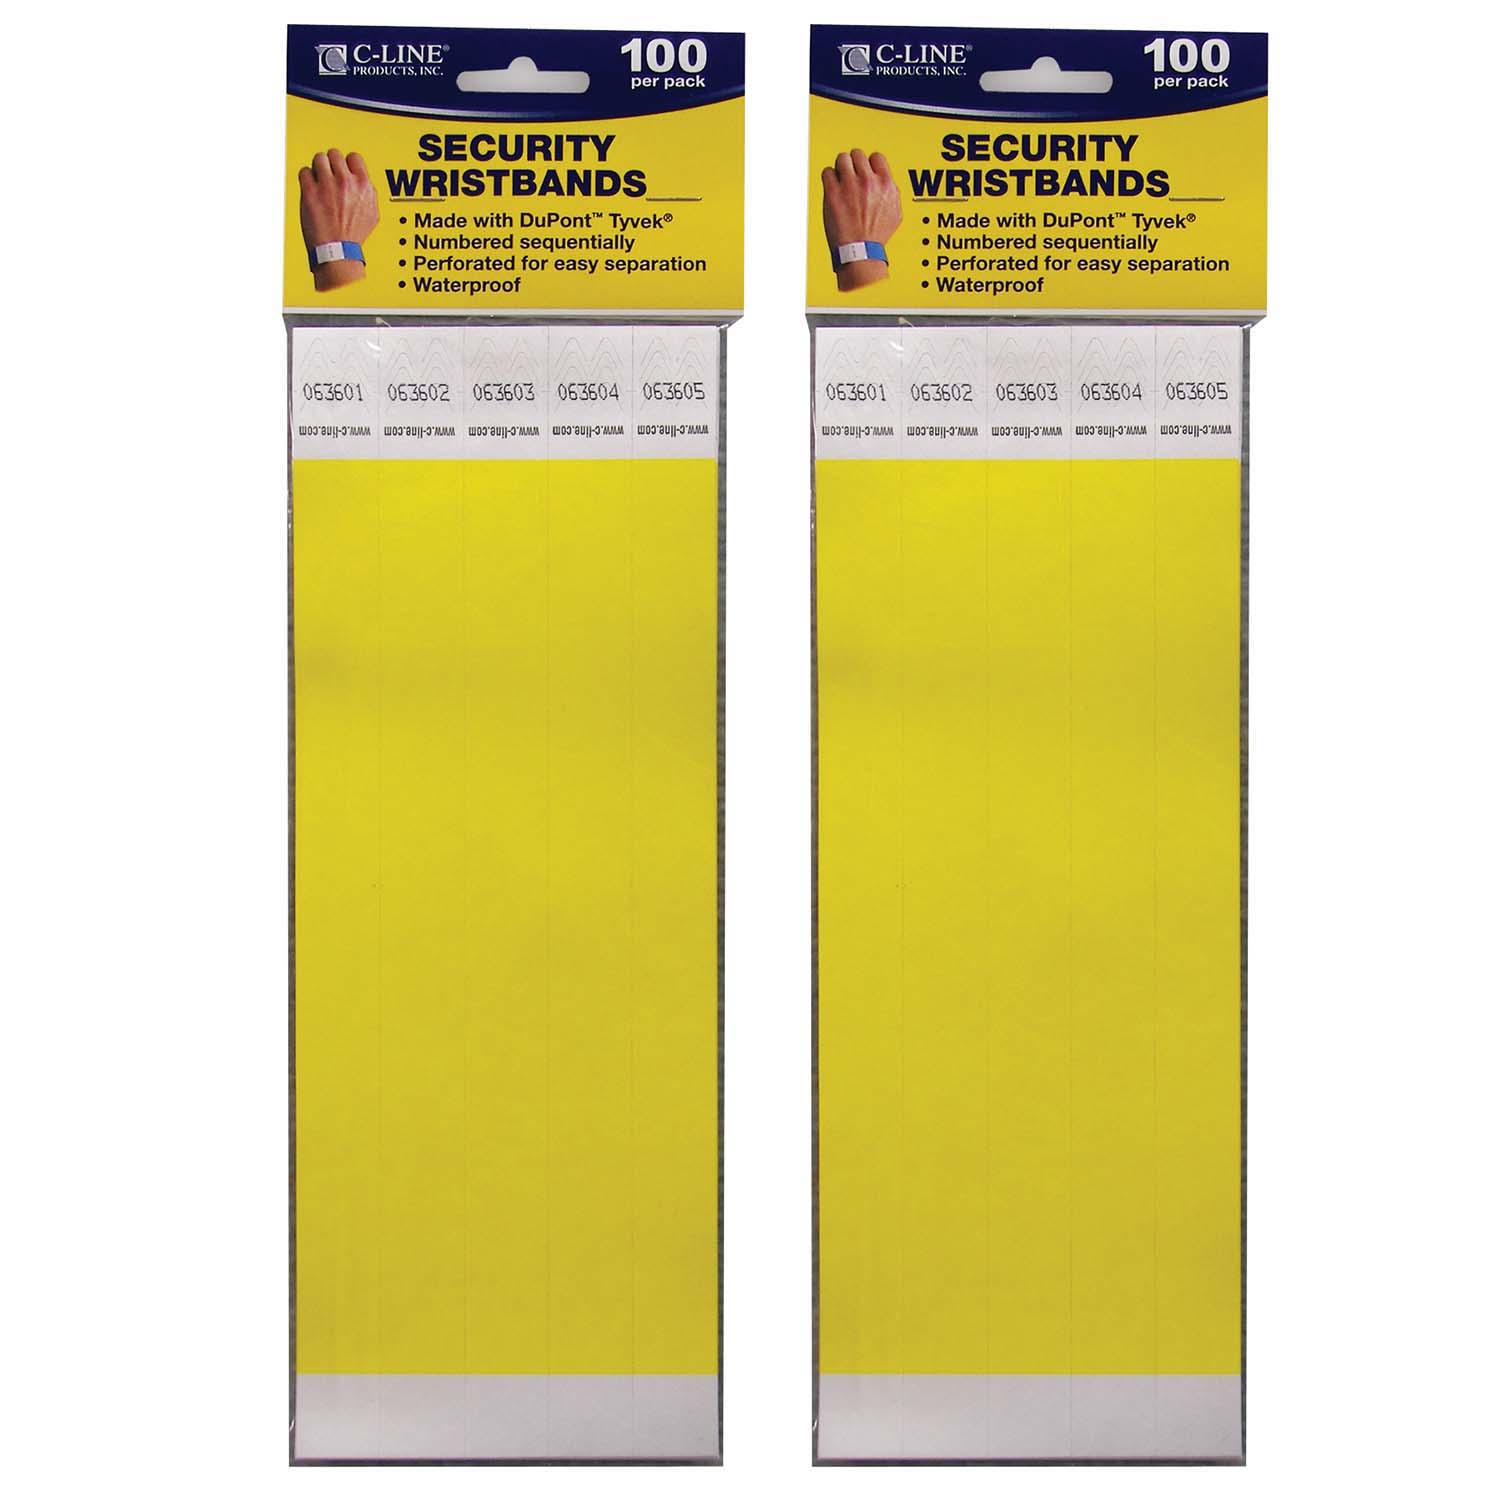 DuPont Tyvek Security Wristbands, Yellow, 100 Per Pack, 2 Packs